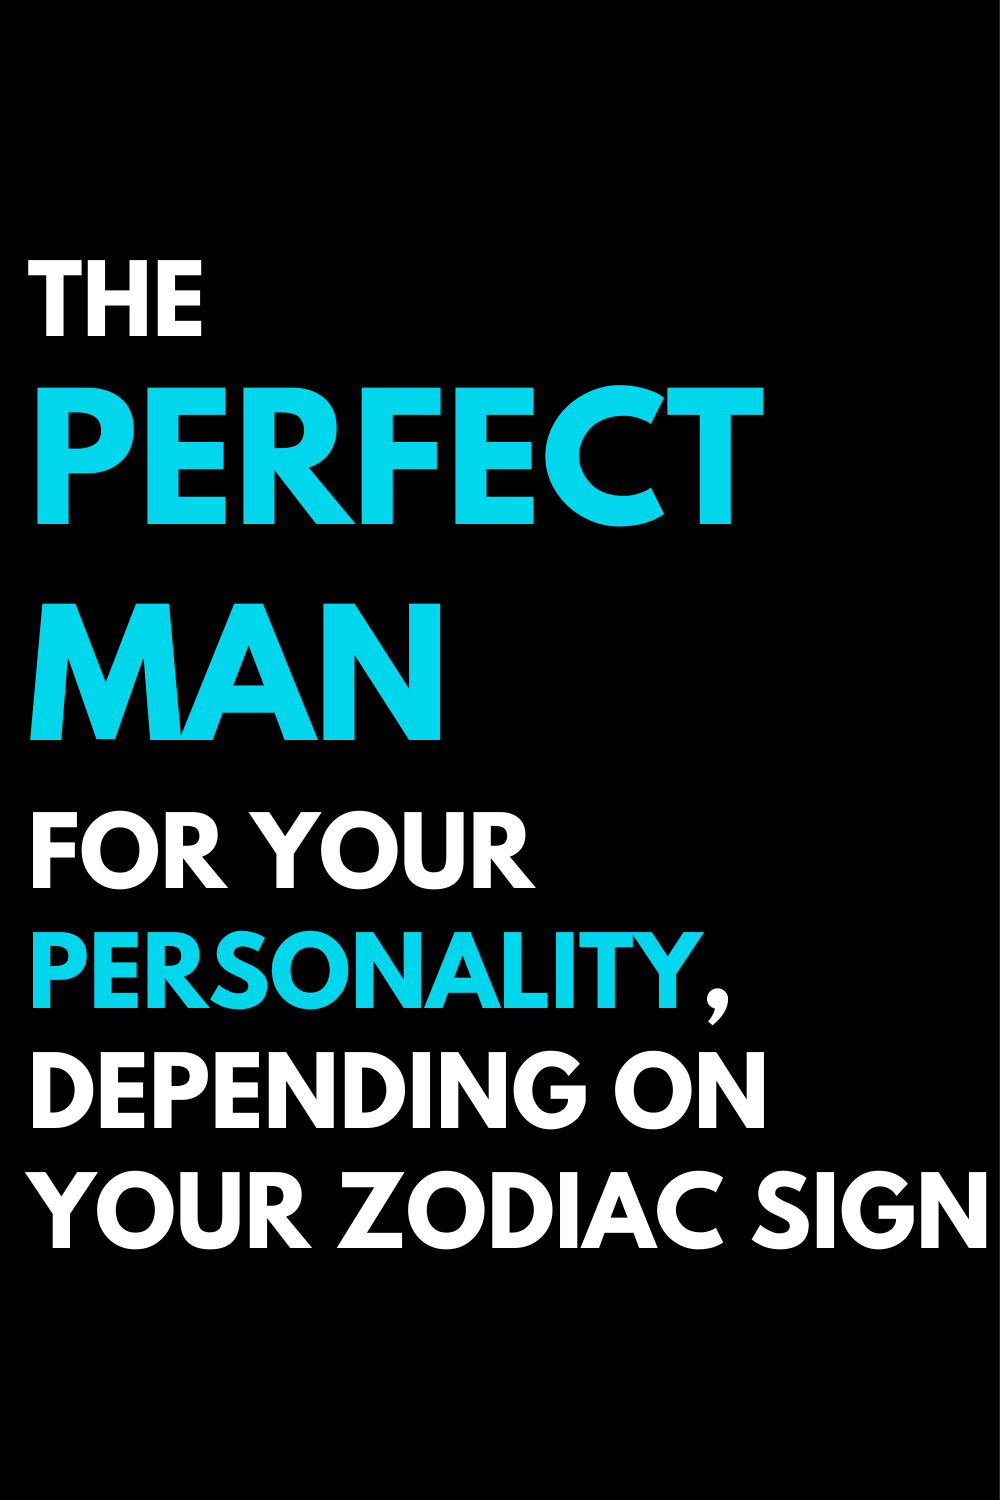 The perfect man for your personality, depending on your zodiac sign